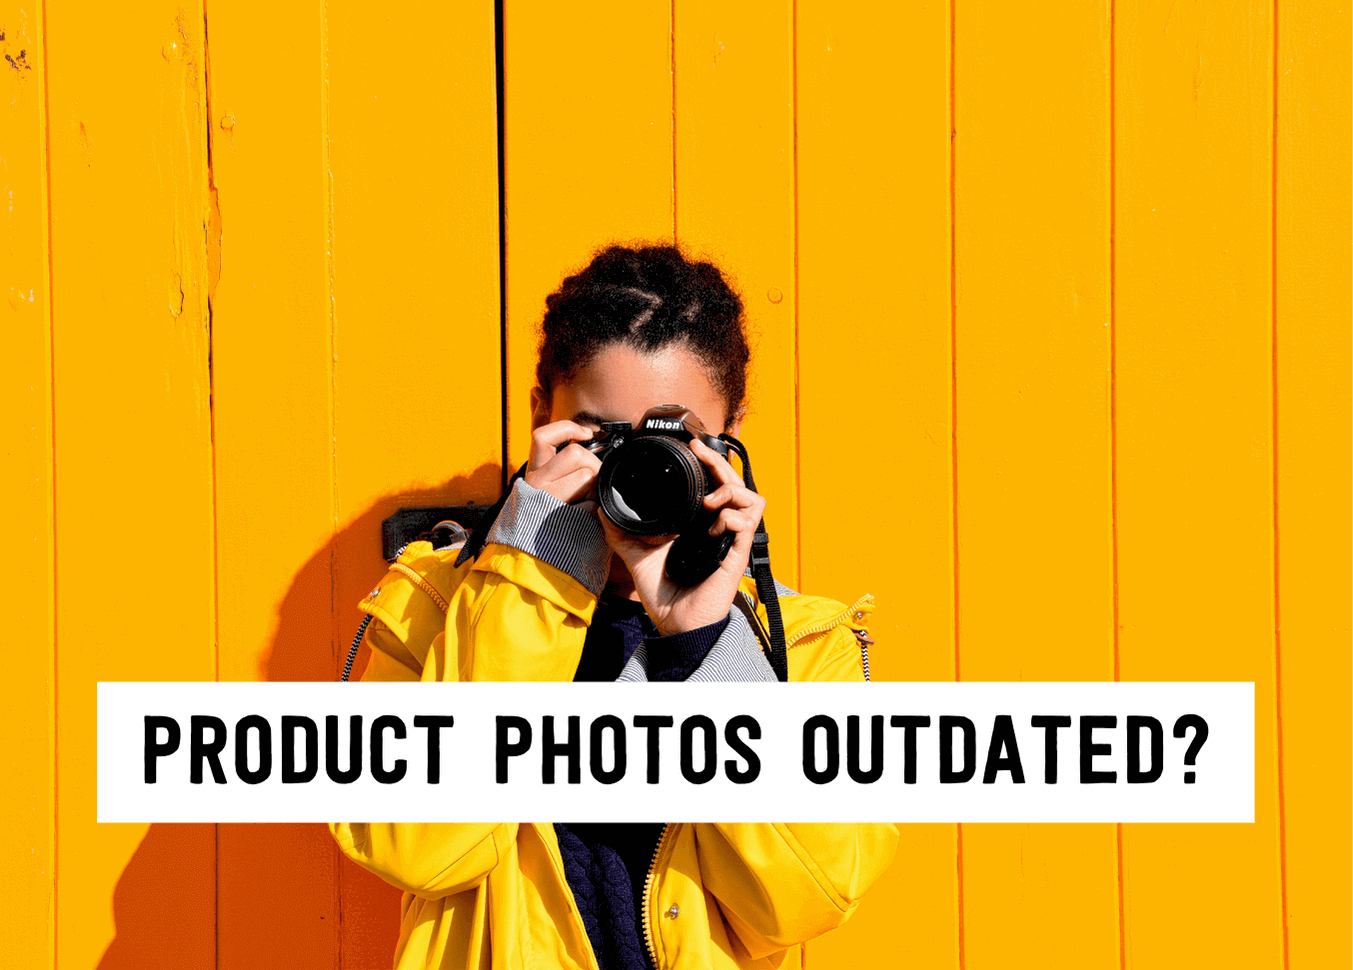 Product photos outdated | Tizzit.co - start and grow a successful handmade business